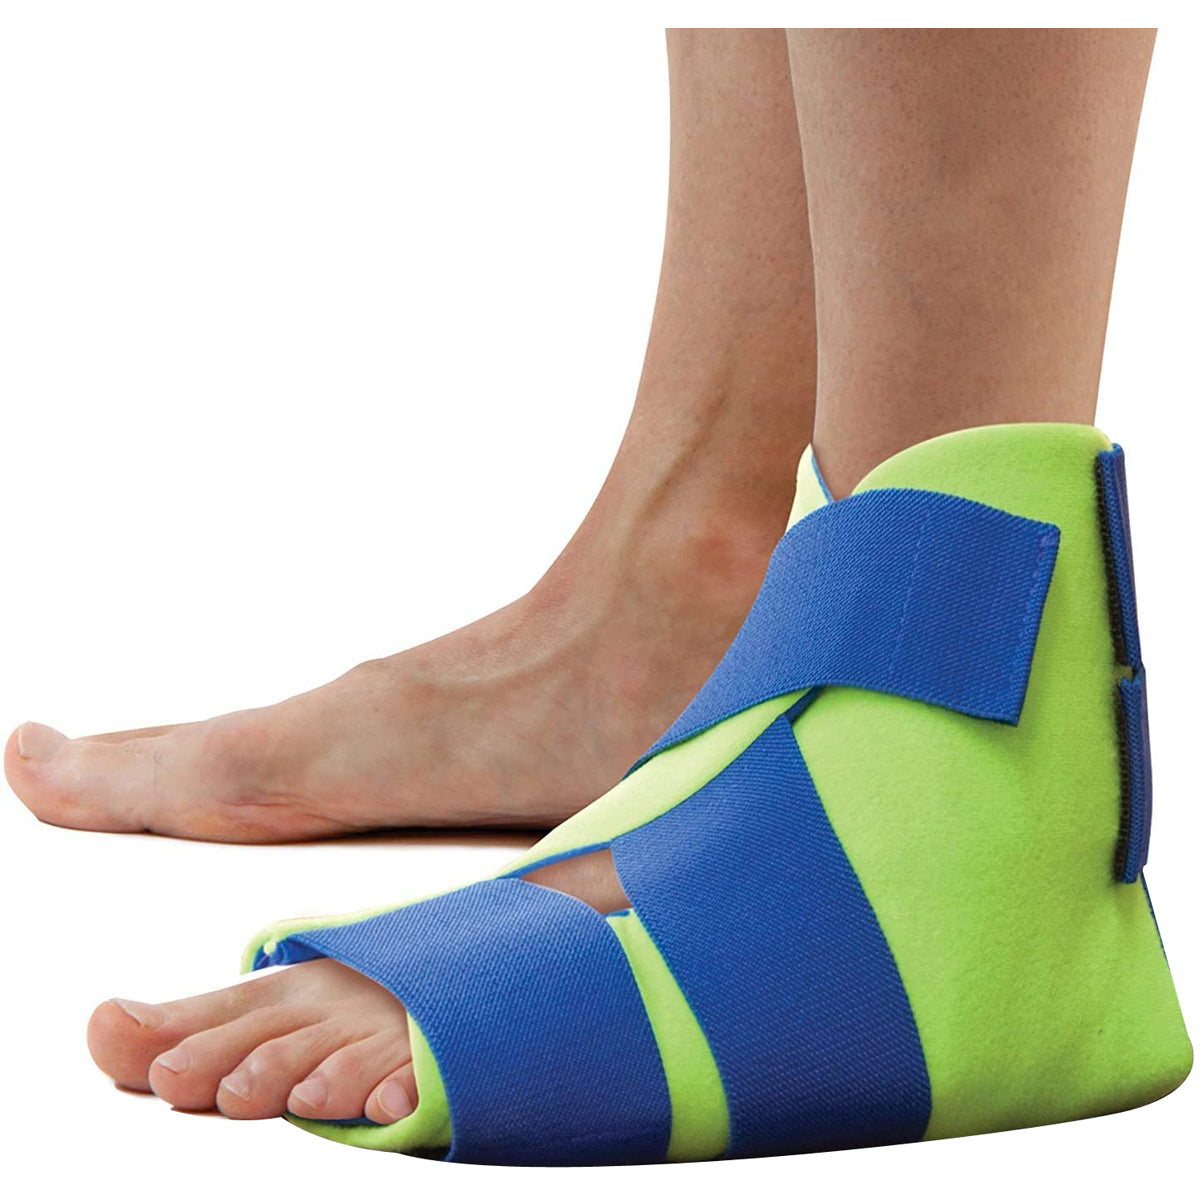 Polar Ice Foot and Ankle Wrap - Universal - Cryotherapy Cold Therapy Pack Polar Ice